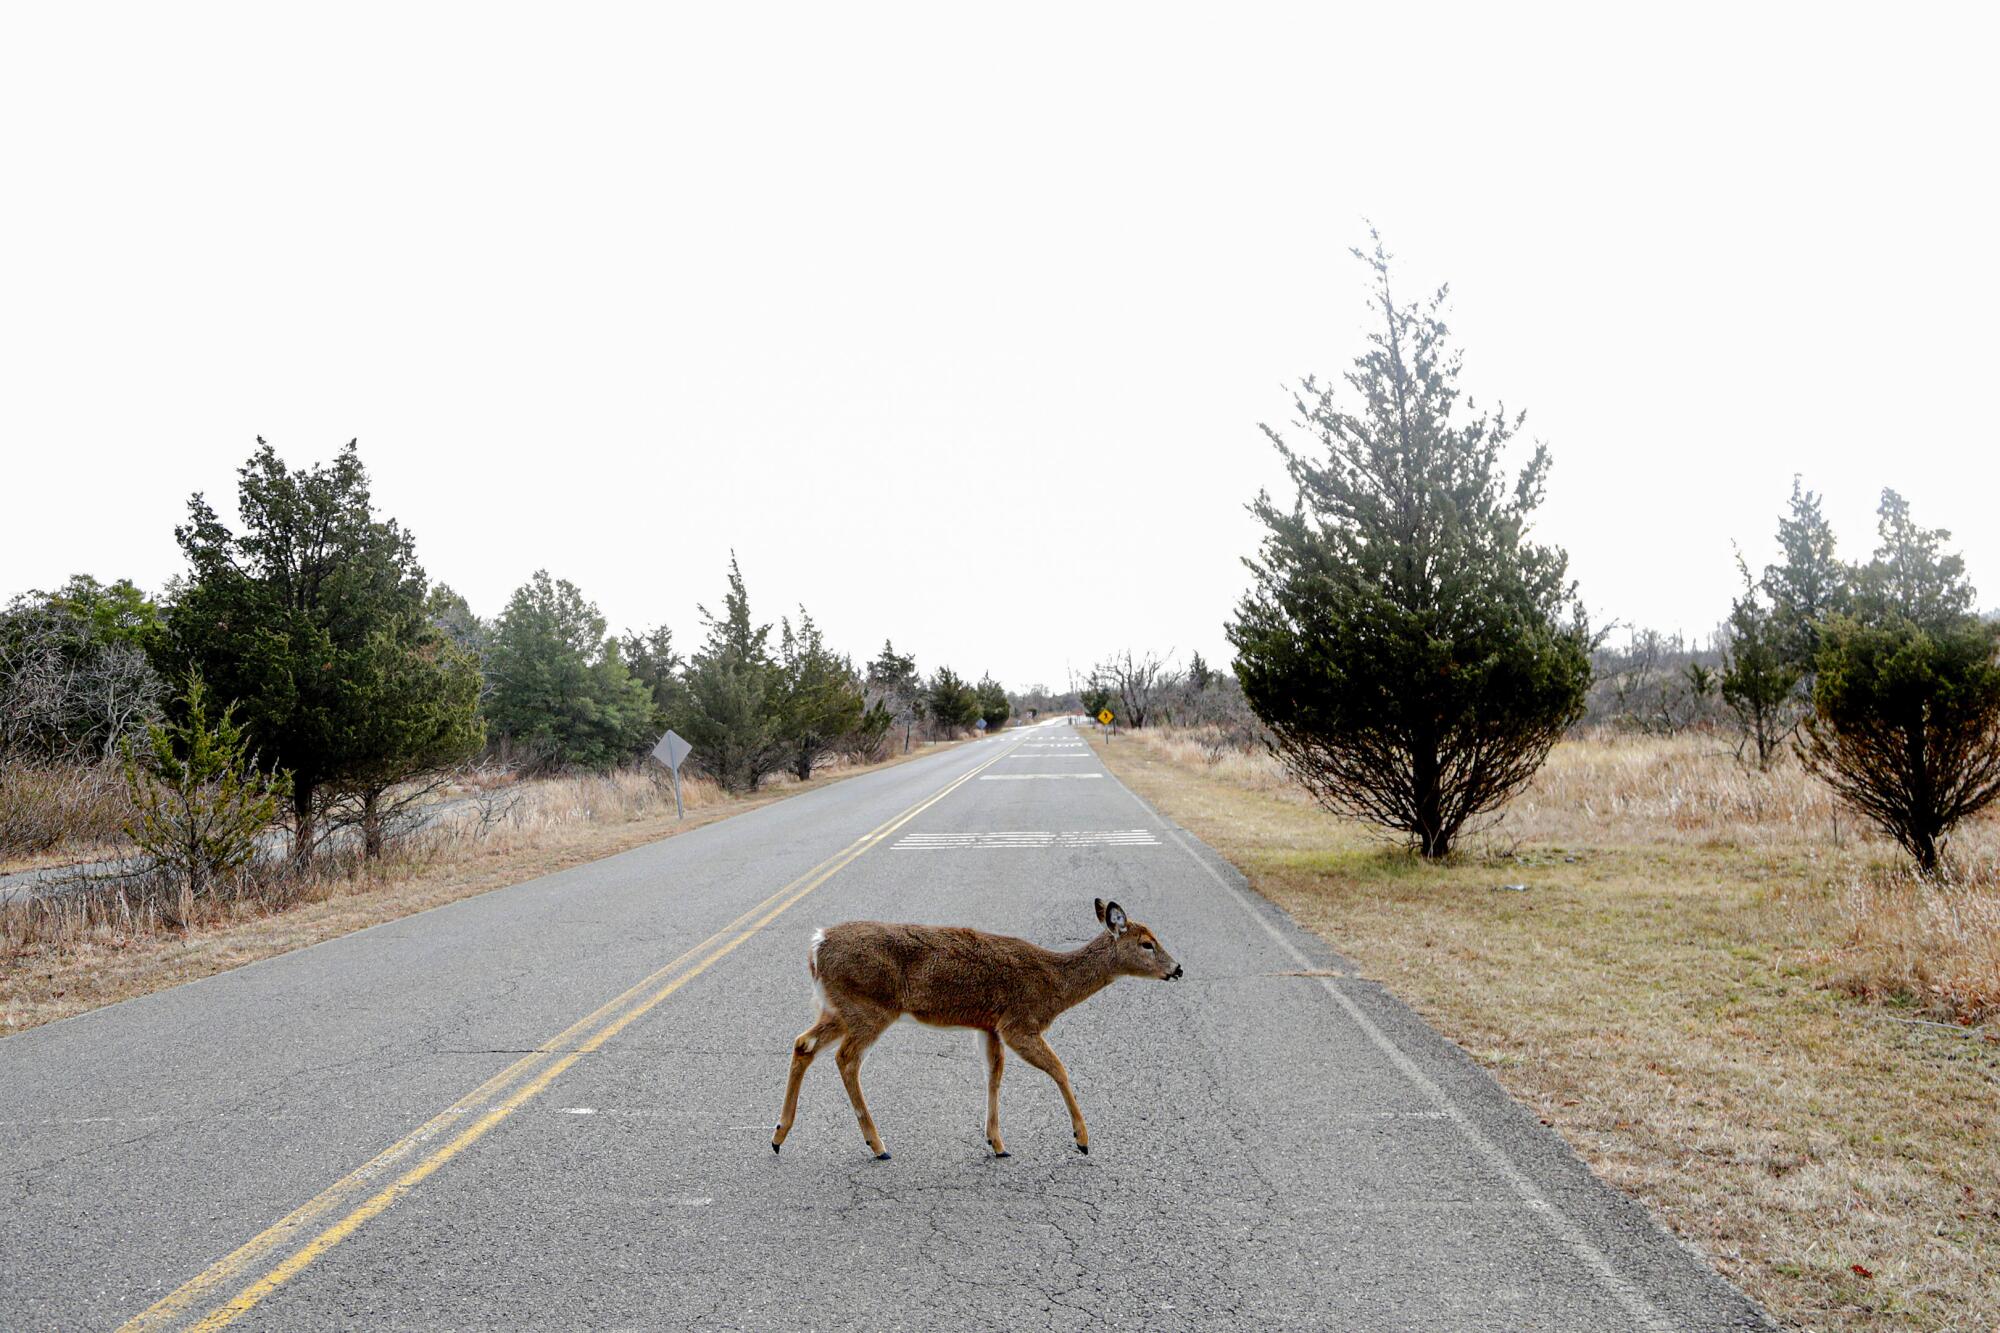 A deer crosses a paved road in a rural area.